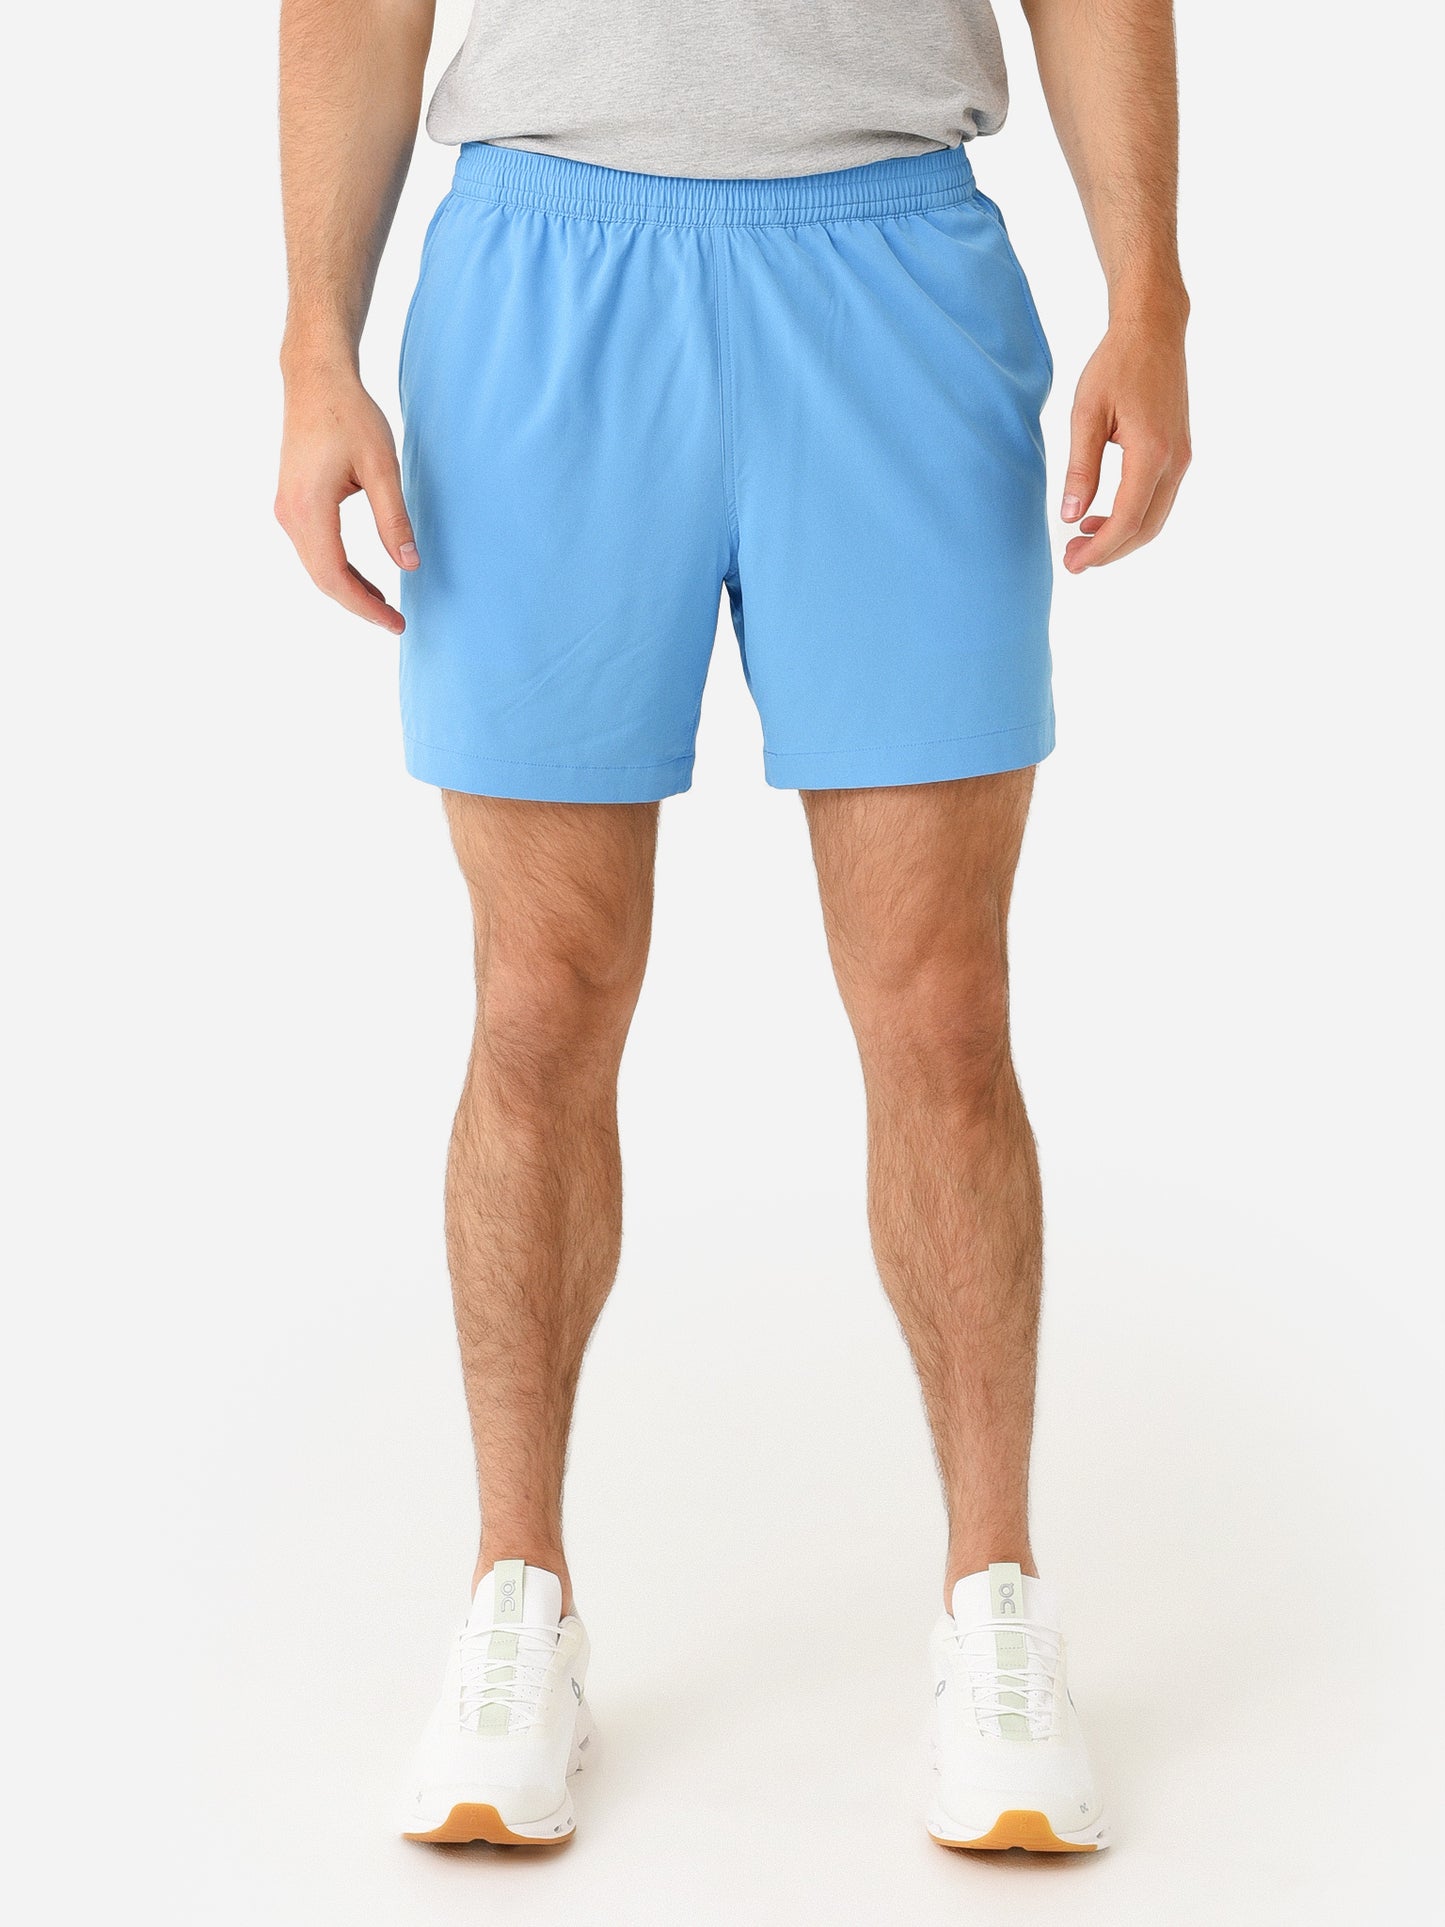 Southern Tide Men's Rip Channel Performance Short